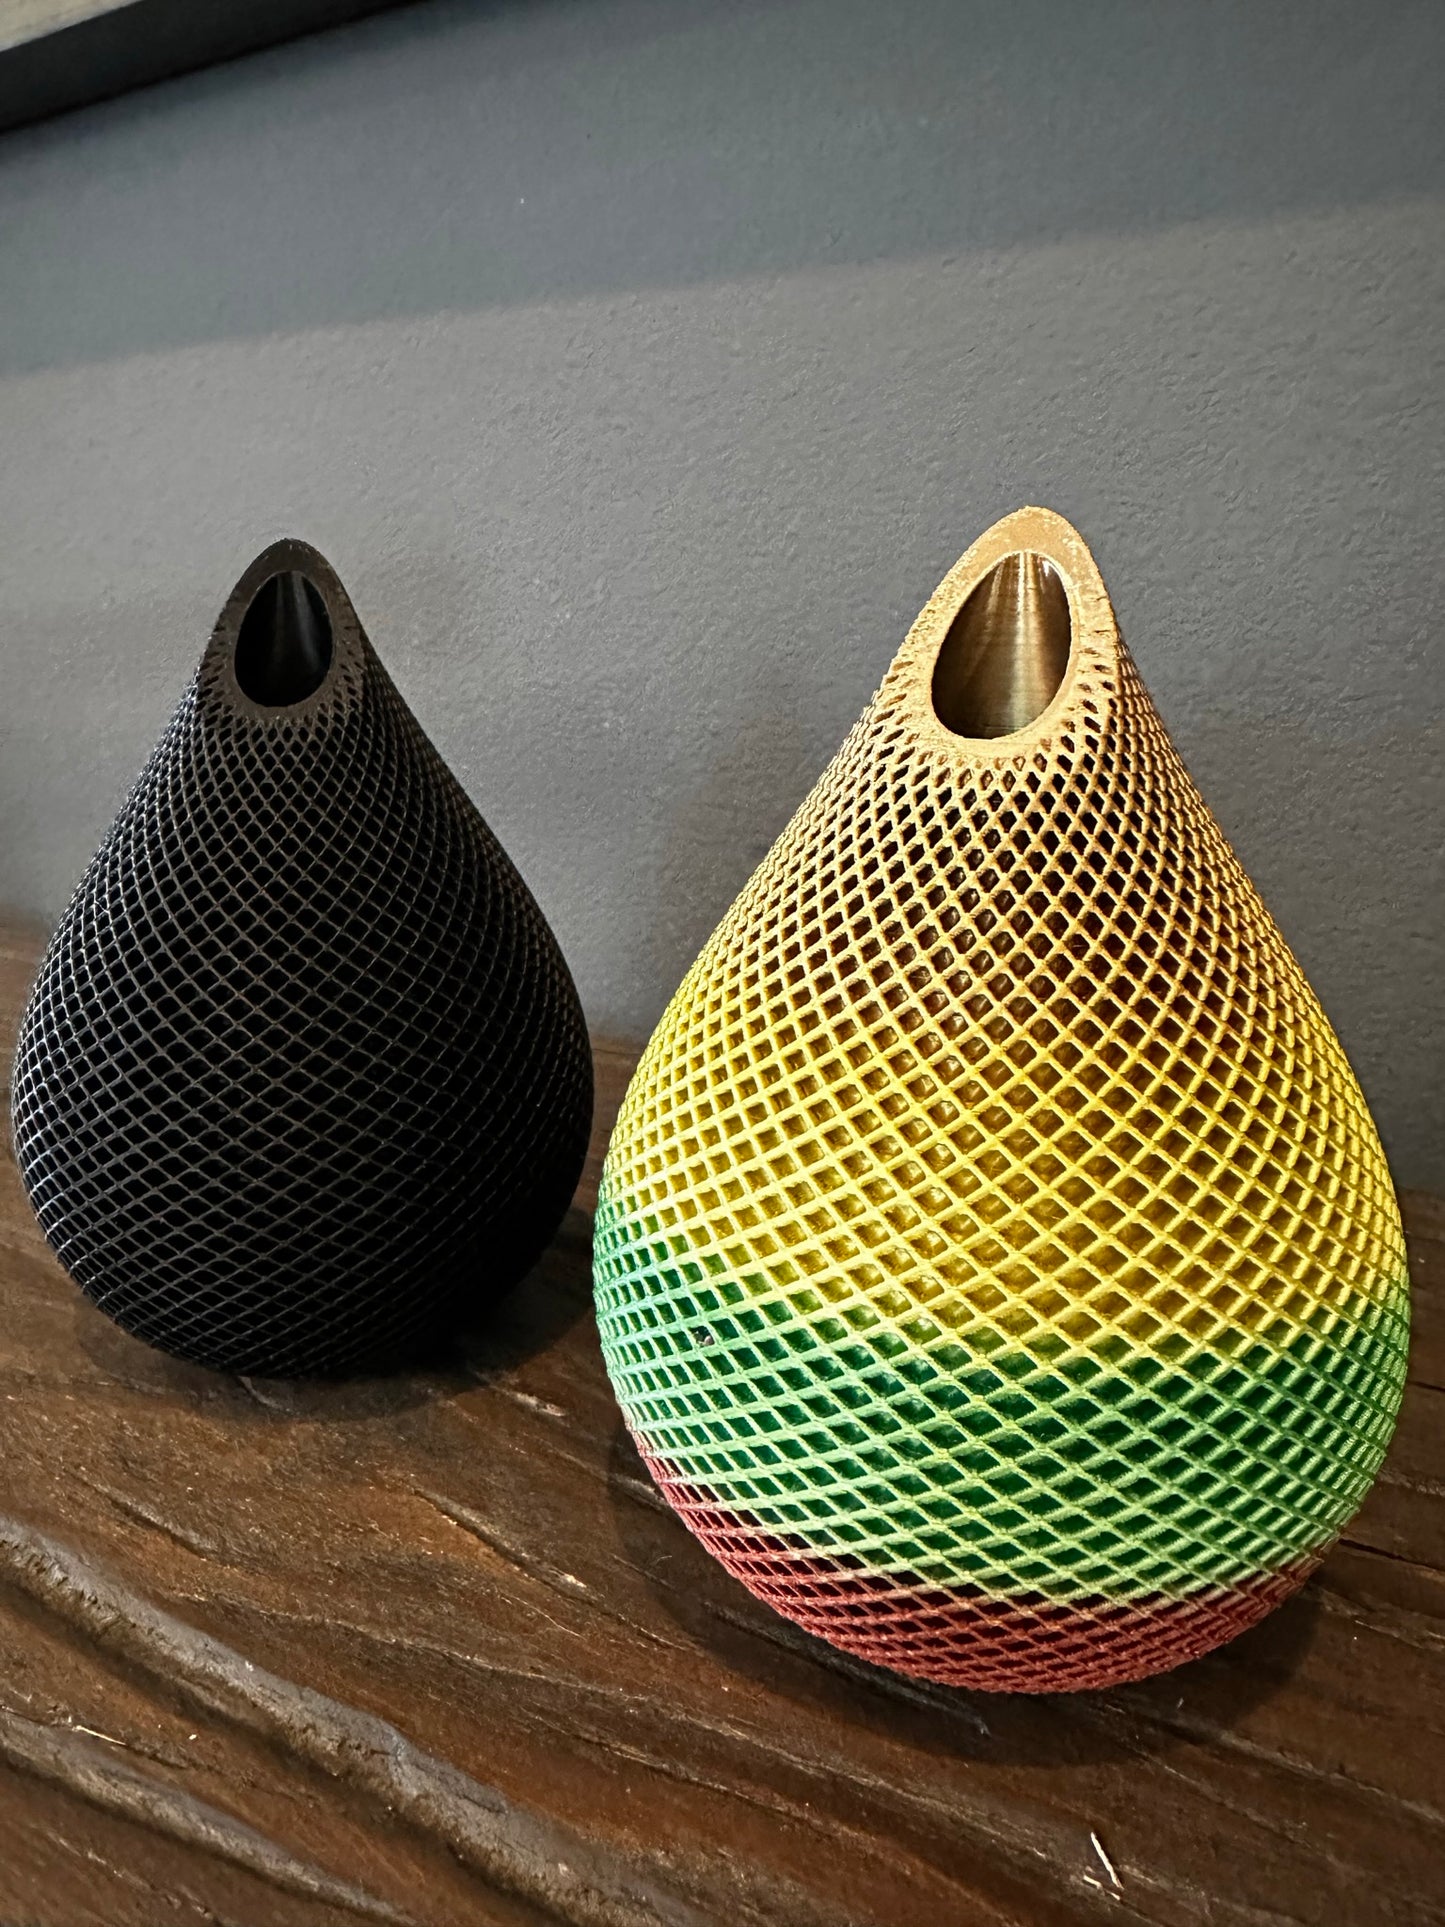 Photo of two Handmade 3D Printed Vases in Black and Rainbow colors with Mesh Pattern